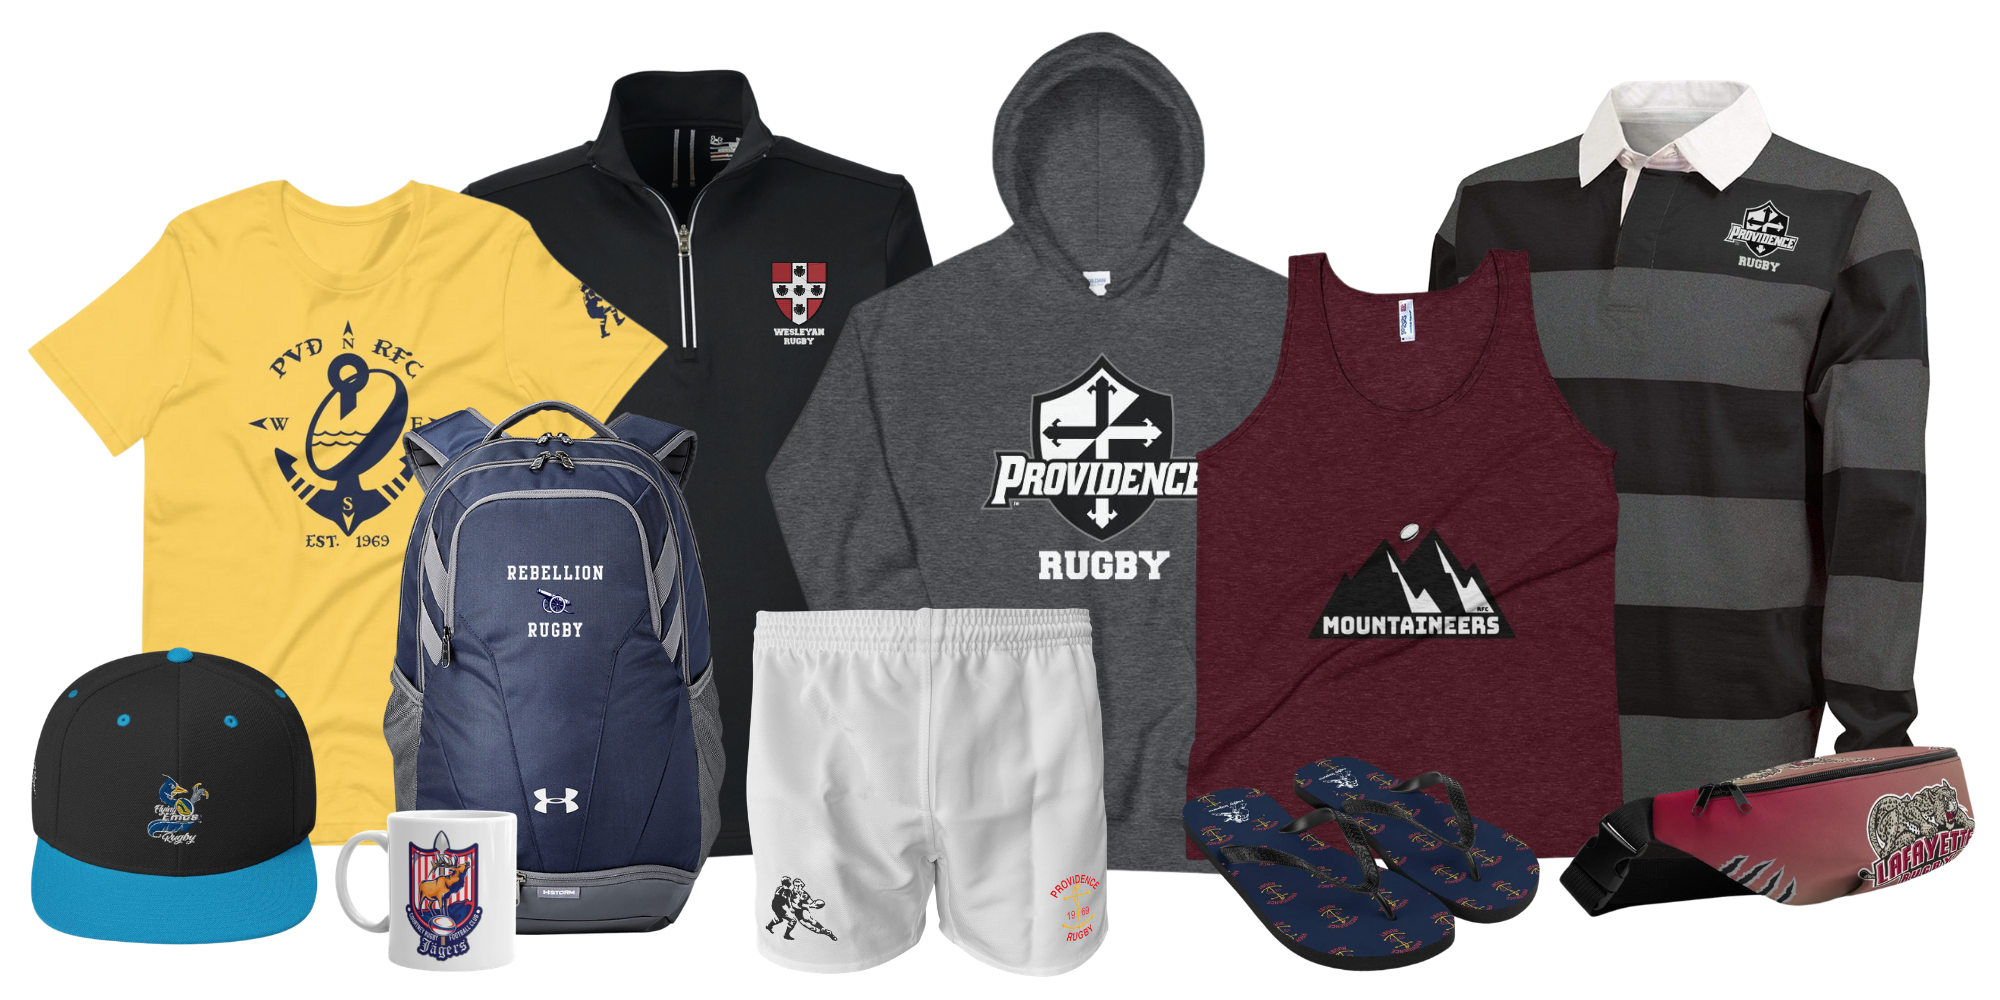 rugby team store